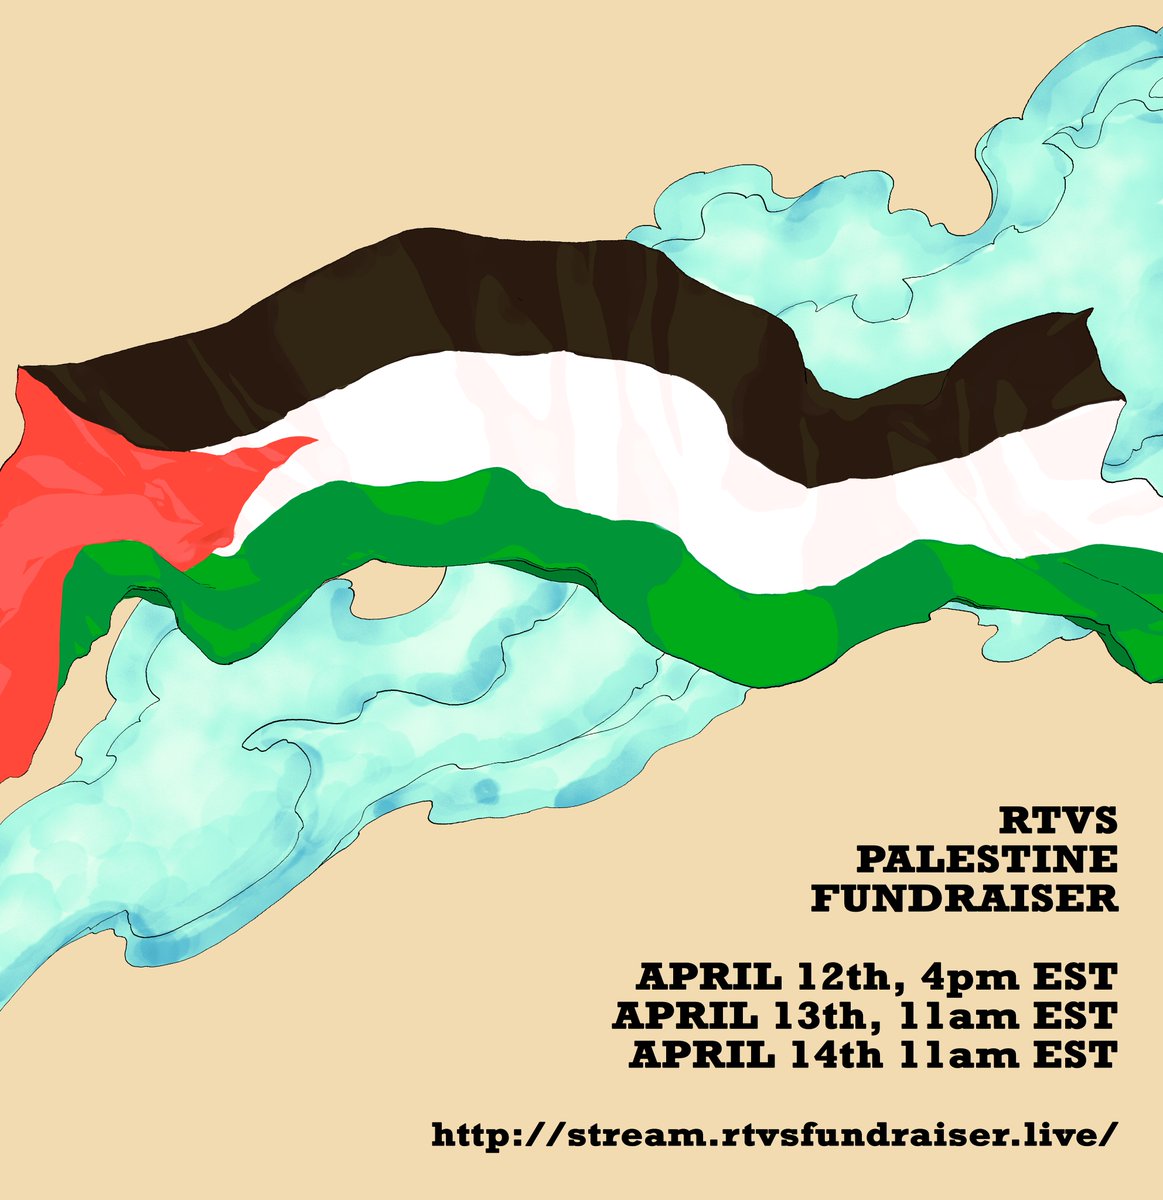 This weekend, Radio TV Solutions will be holding a 3 day marathon fundraiser event for the people of Palestine. All weekend long, we will be streaming a variety of games and events in an effort to raise money for on-the-ground aid groups and direct Palestinian support campaigns.